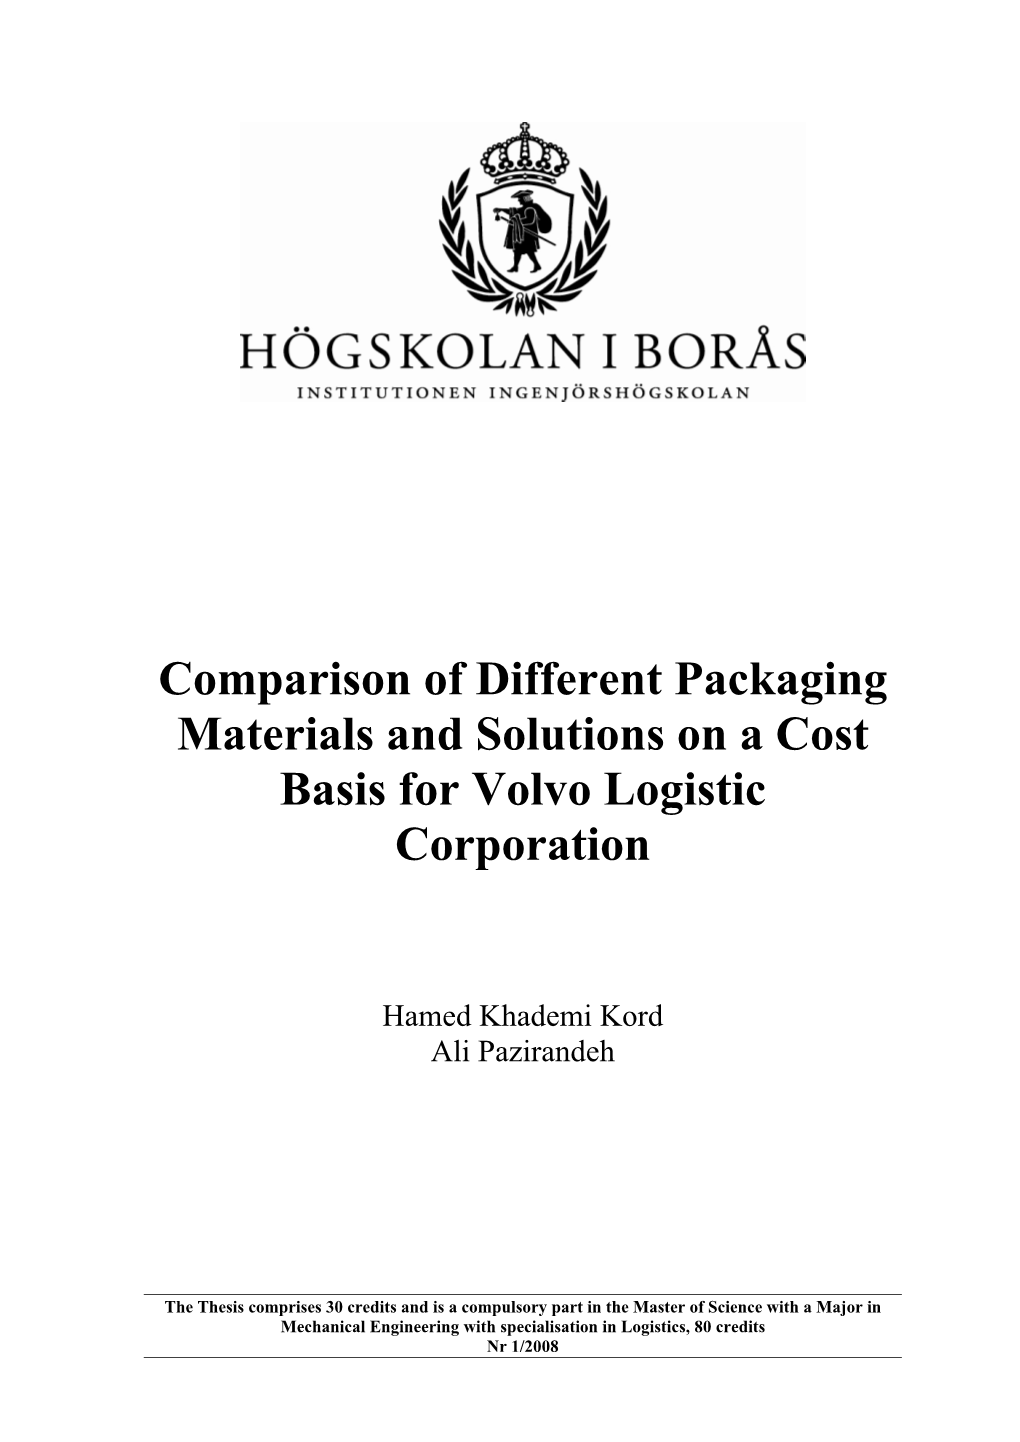 Comparison of Different Packaging Materials and Solutions on a Cost Basis for Volvo Logistic Corporation